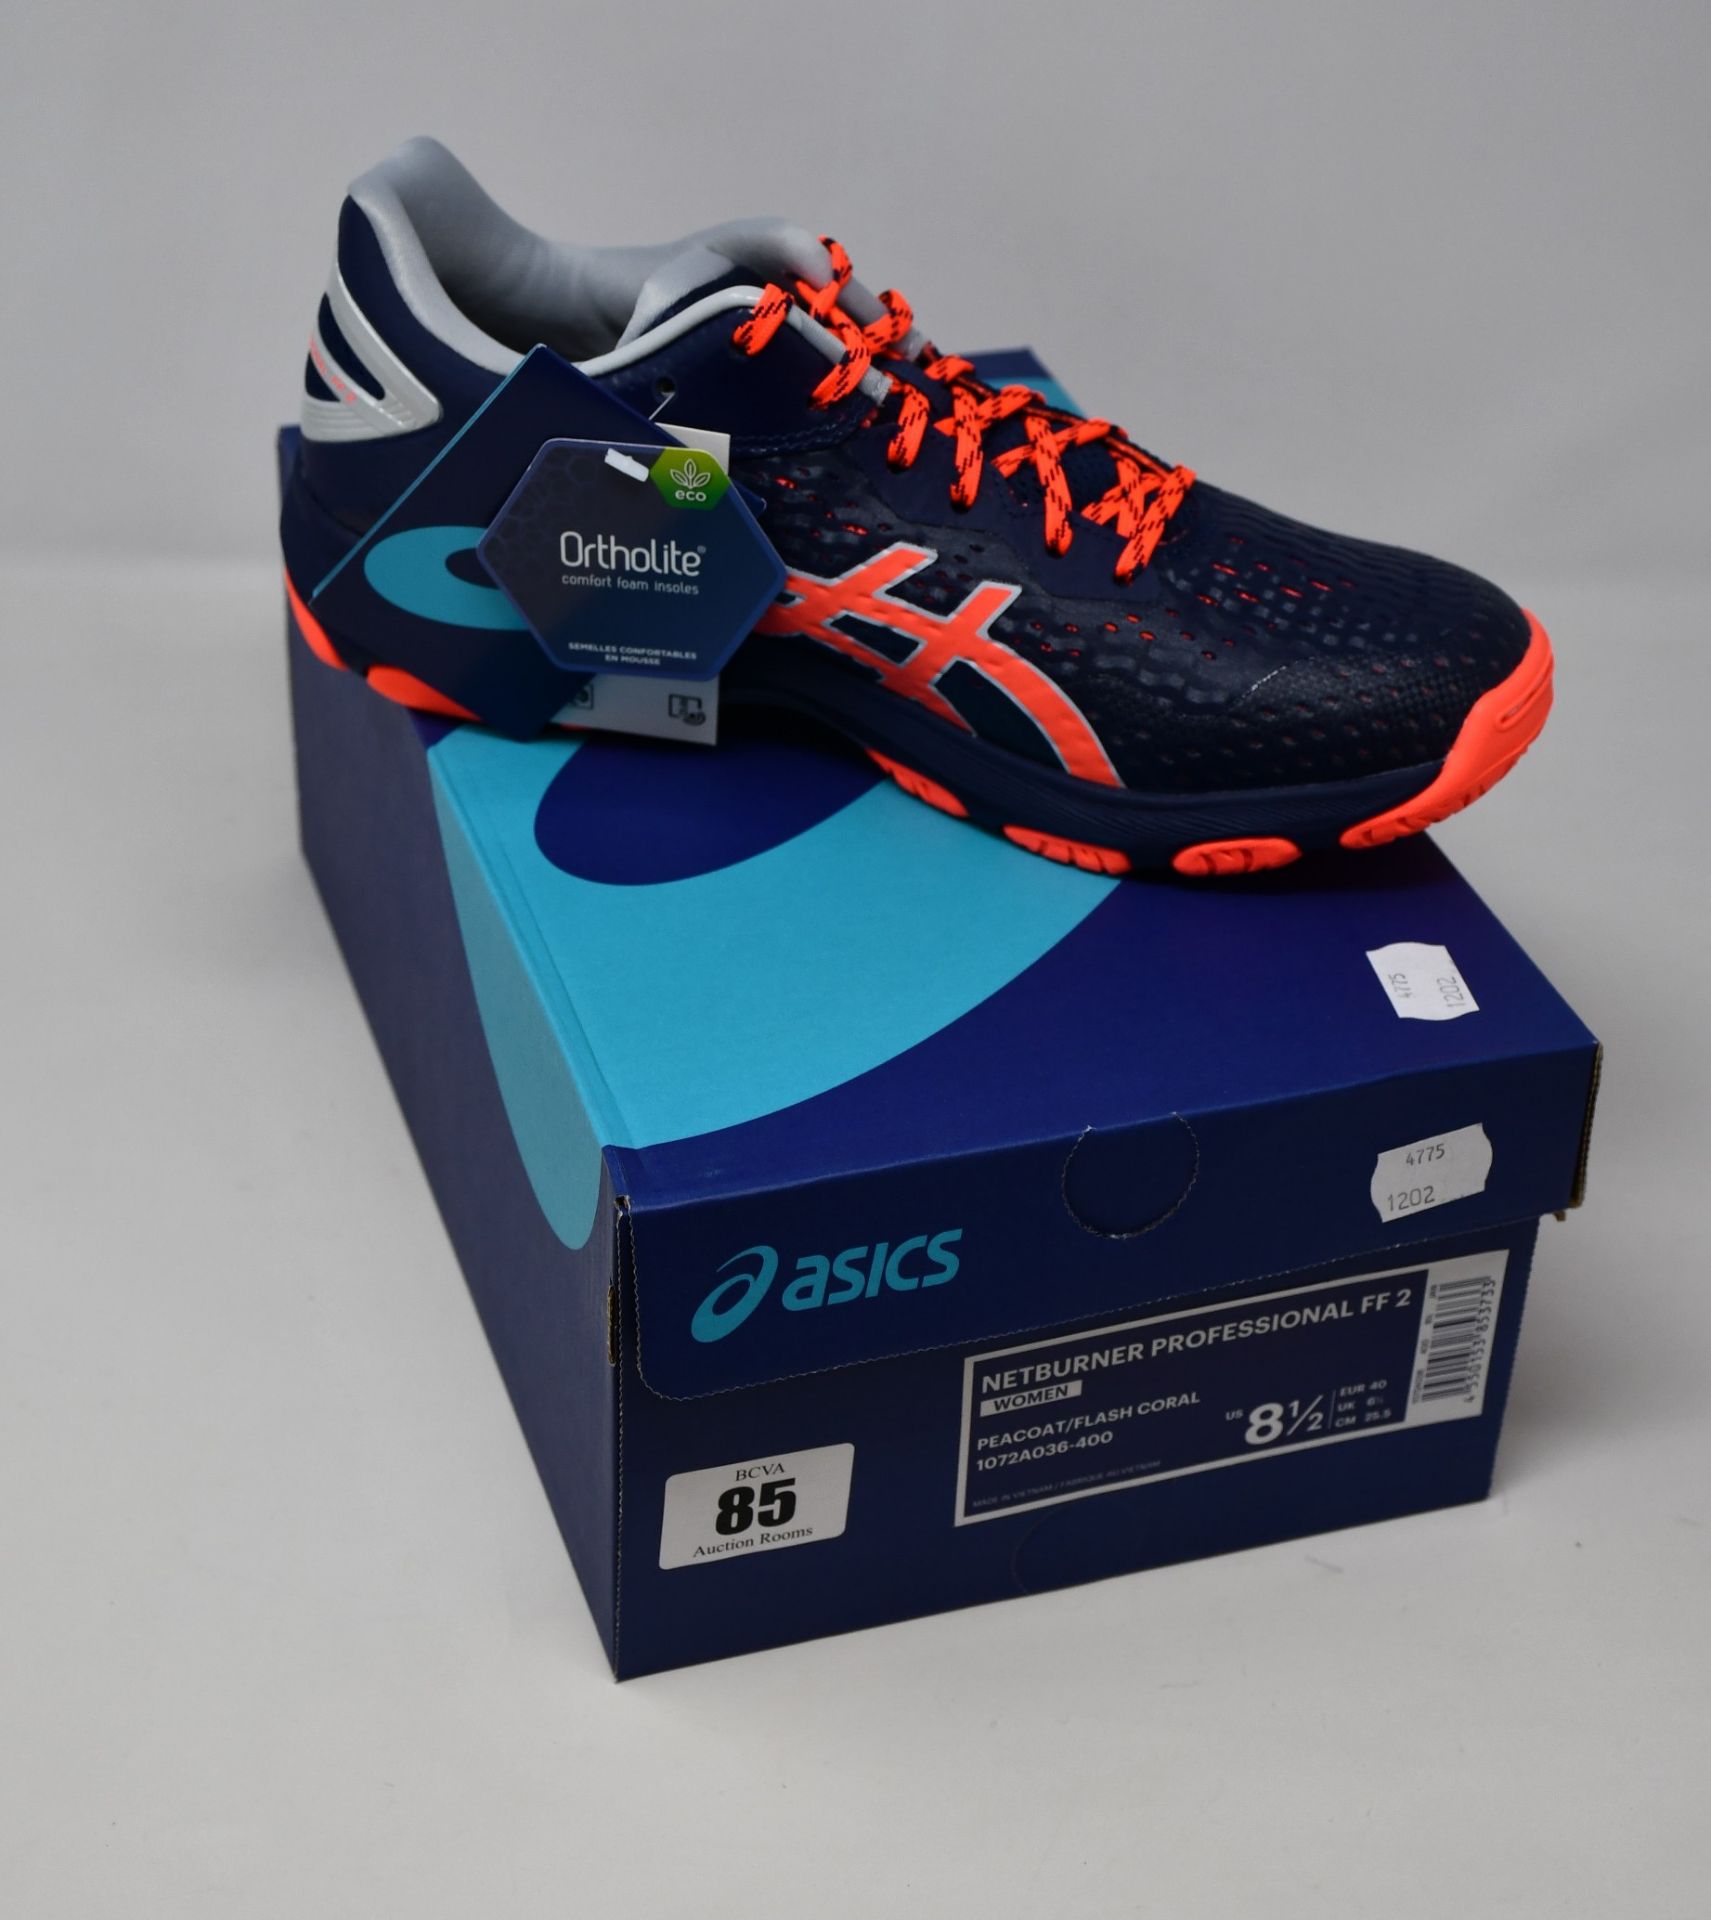 A pair of as new Asics Netburner Super FF 2 trainers (UK 6.5).